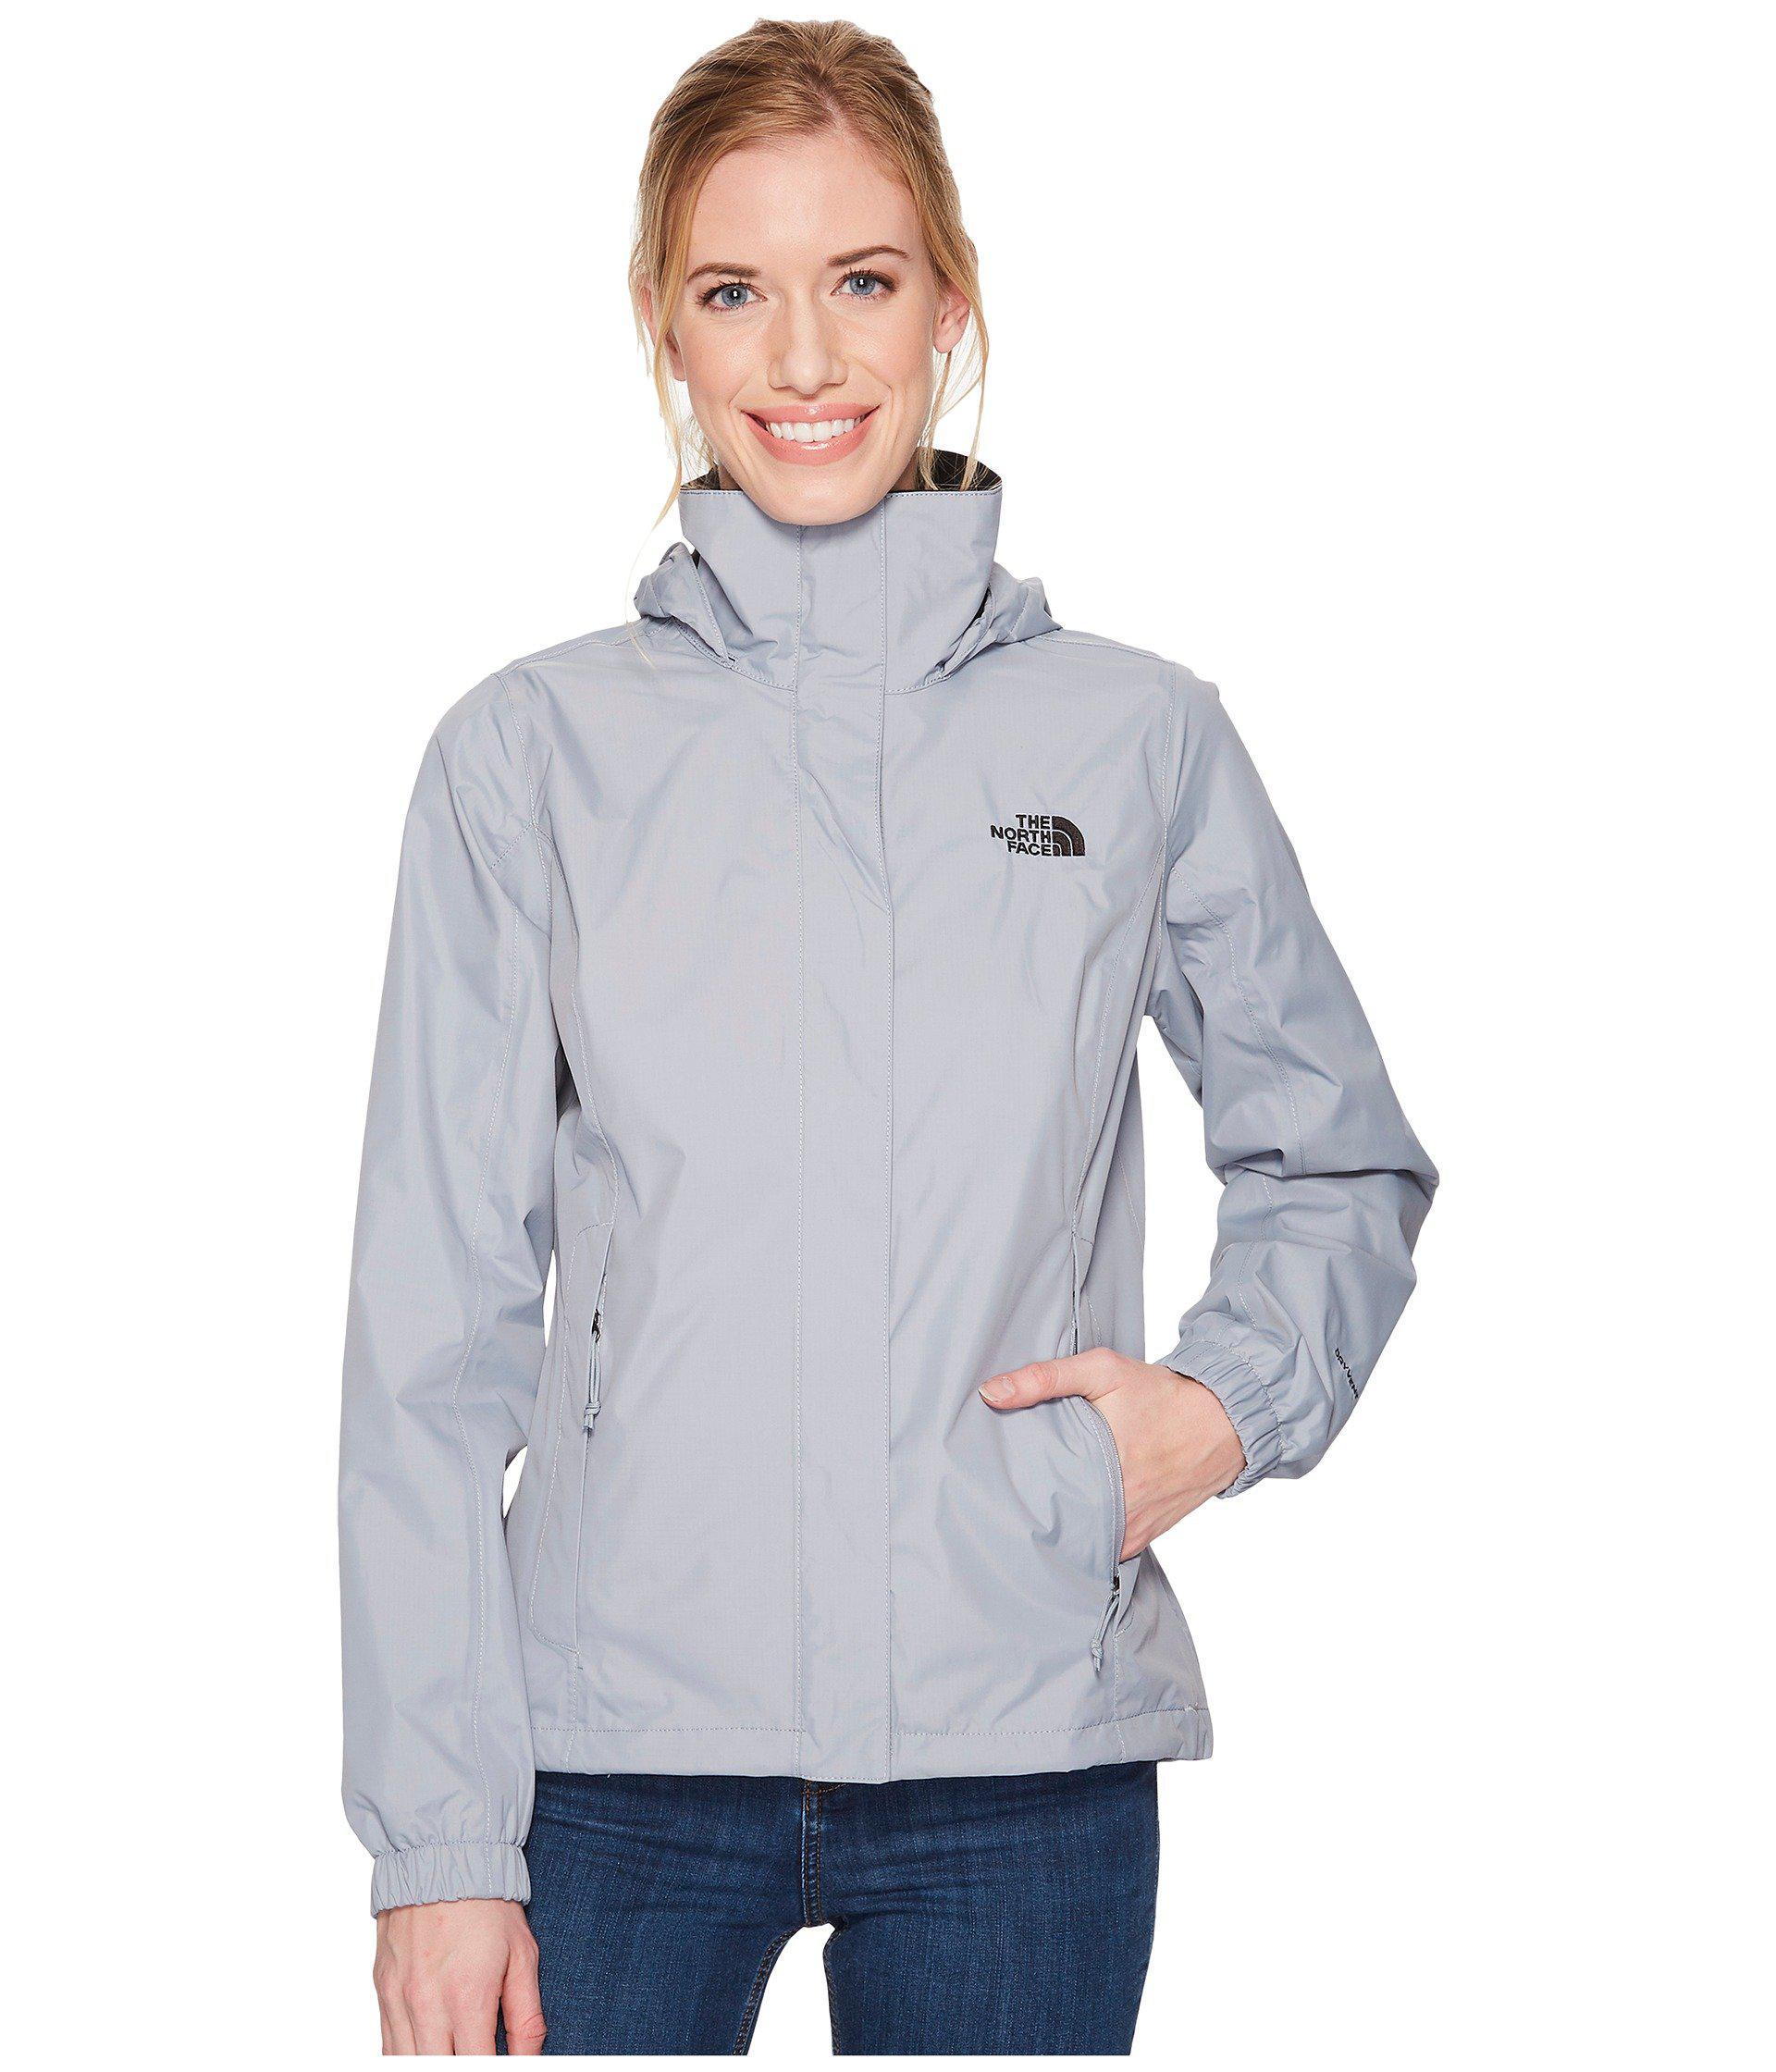 the north face resolve 2 hooded jacket